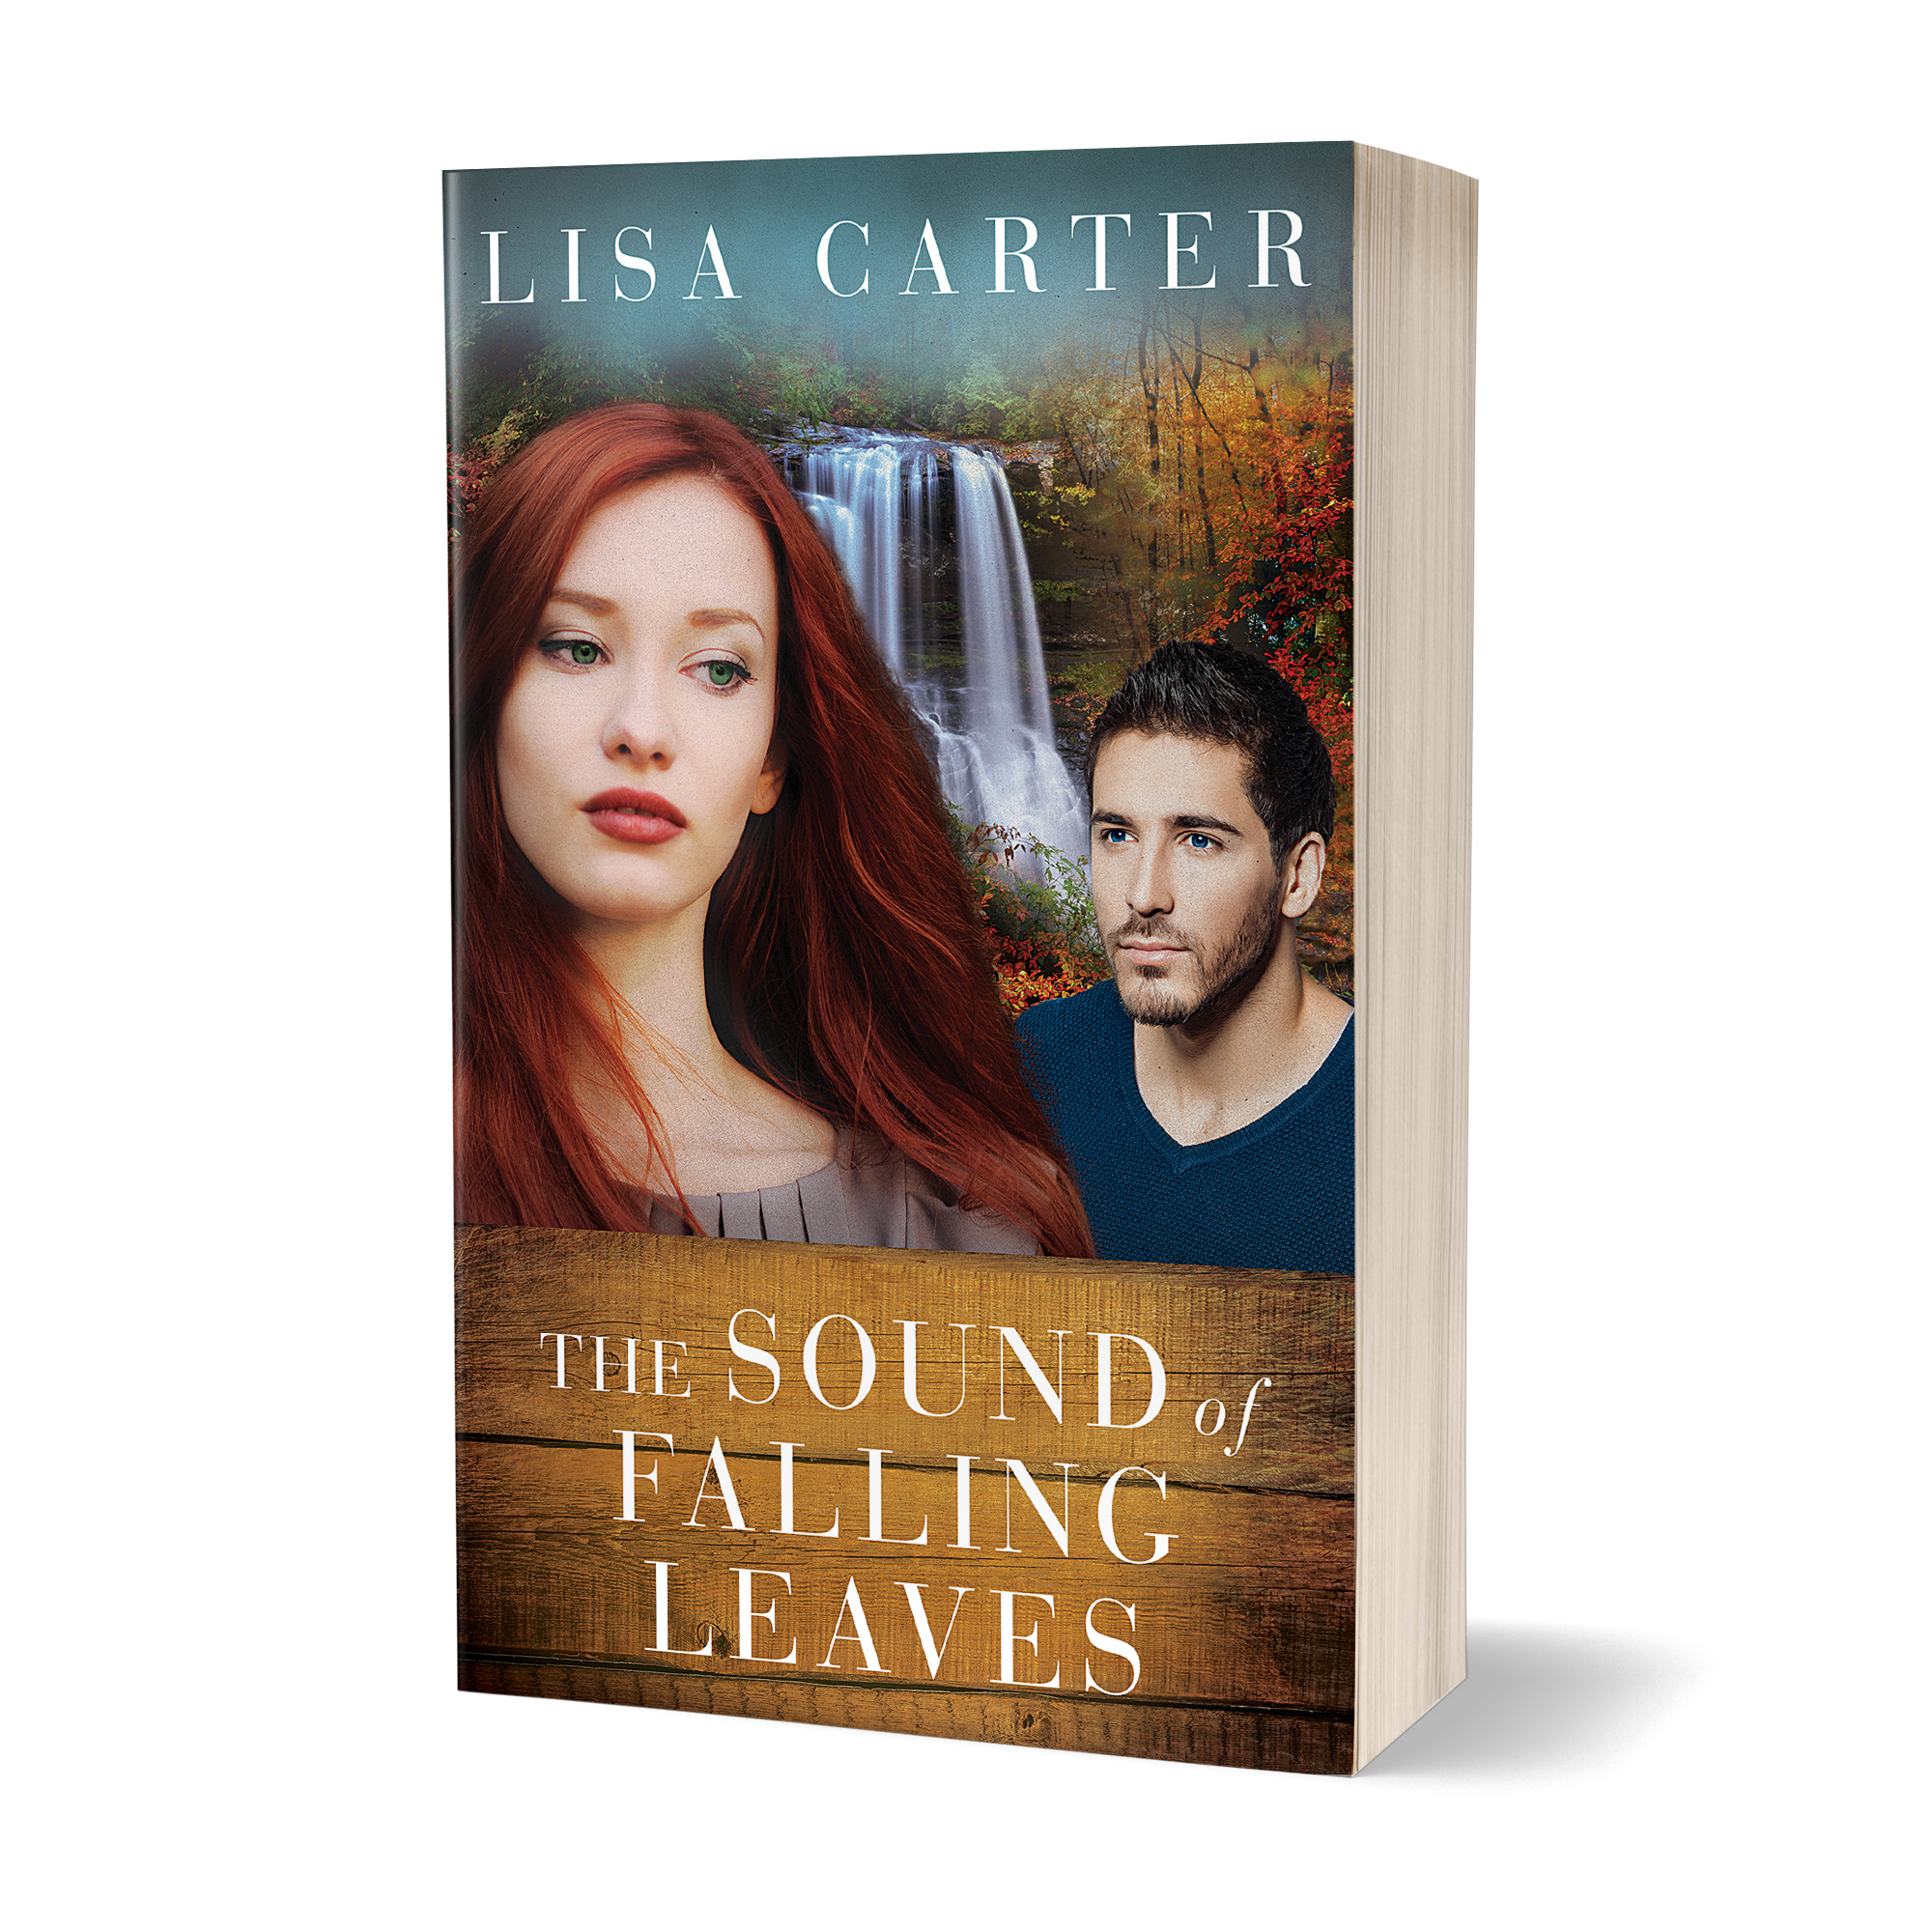  The Sound of Falling Leaves - Lisa Carter 